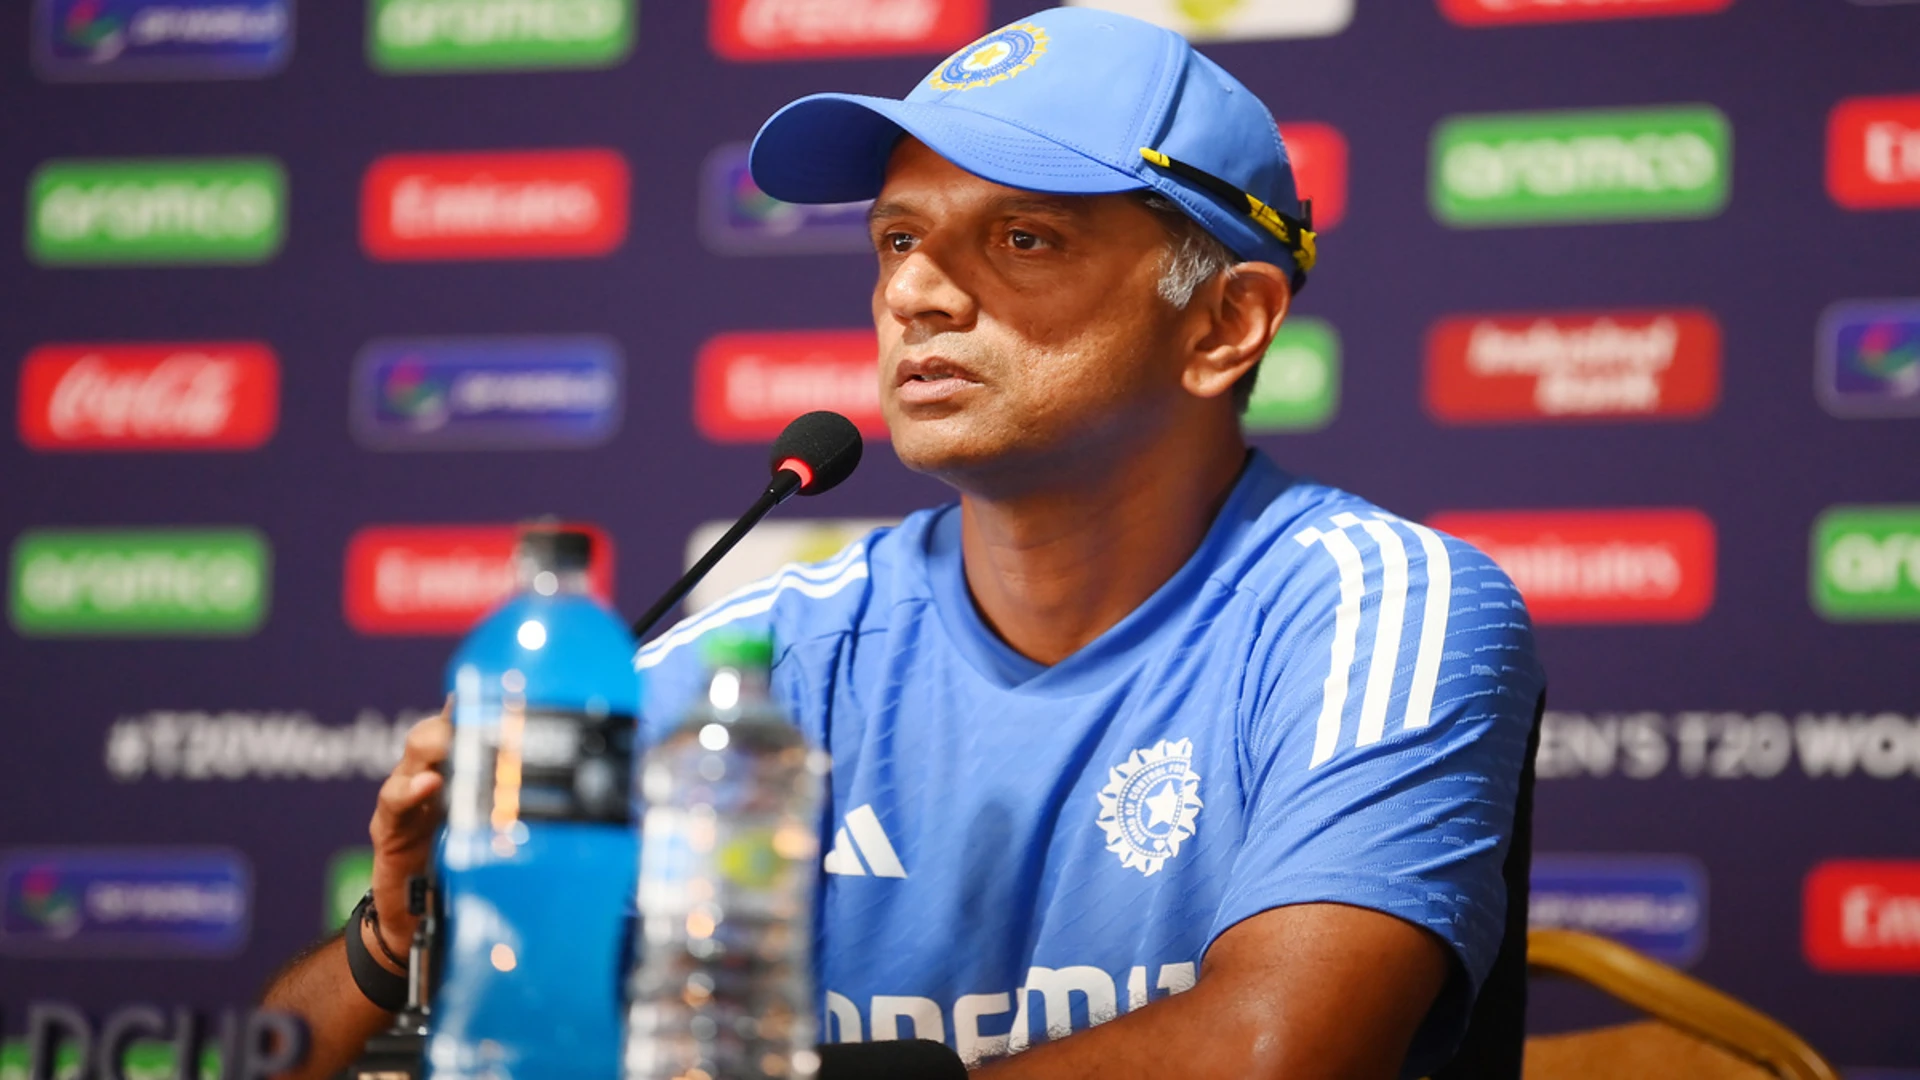 India's Dravid hoping for third time lucky